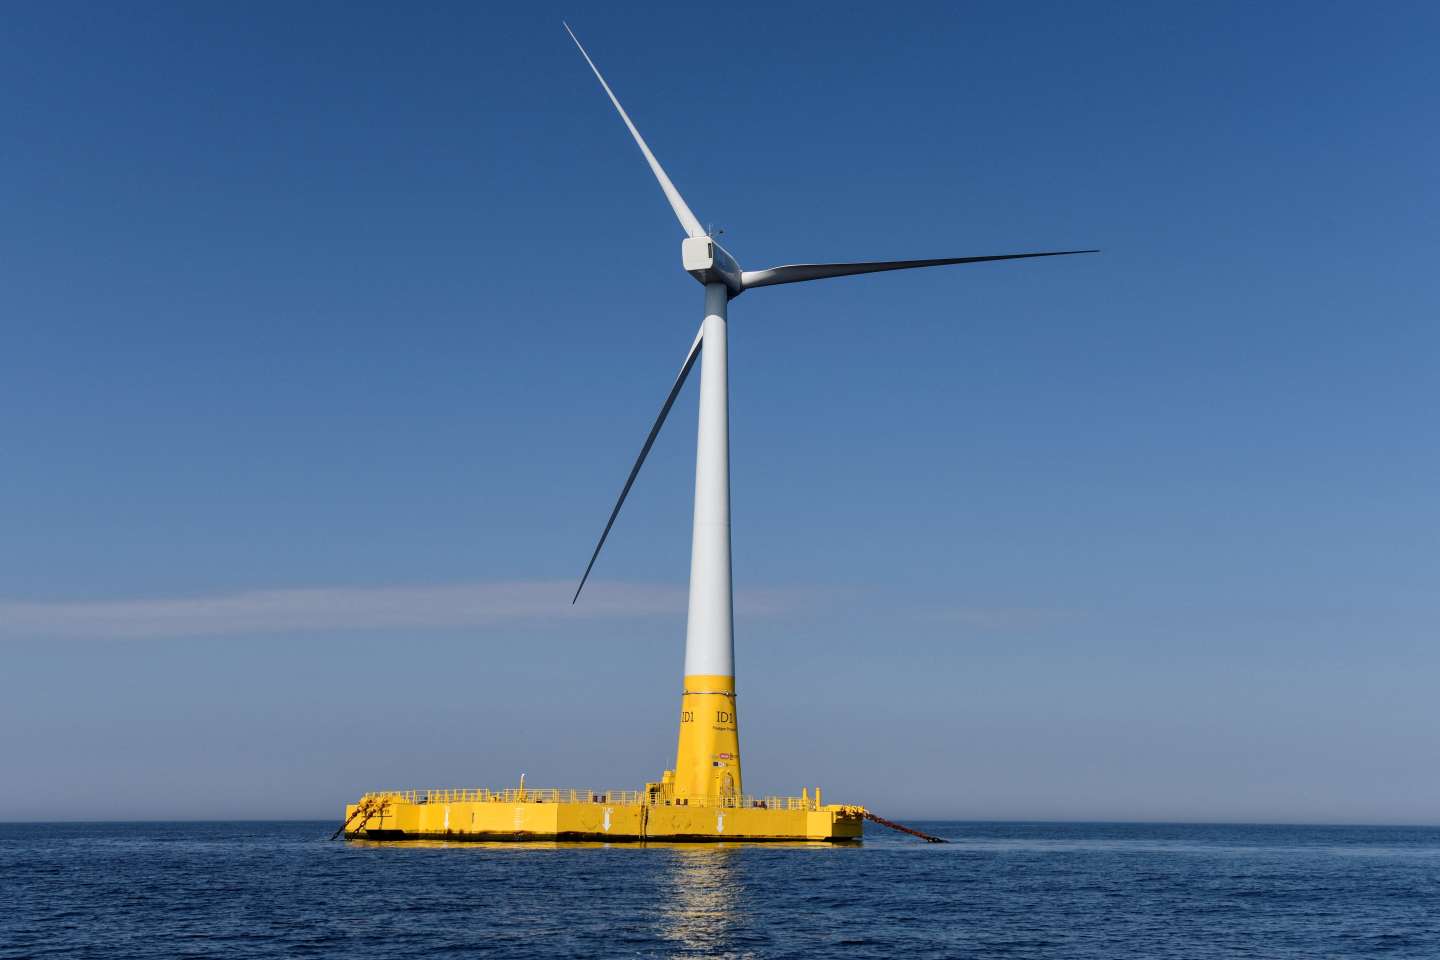 Abandonment of a floating wind turbine pilot project from Morbihan

